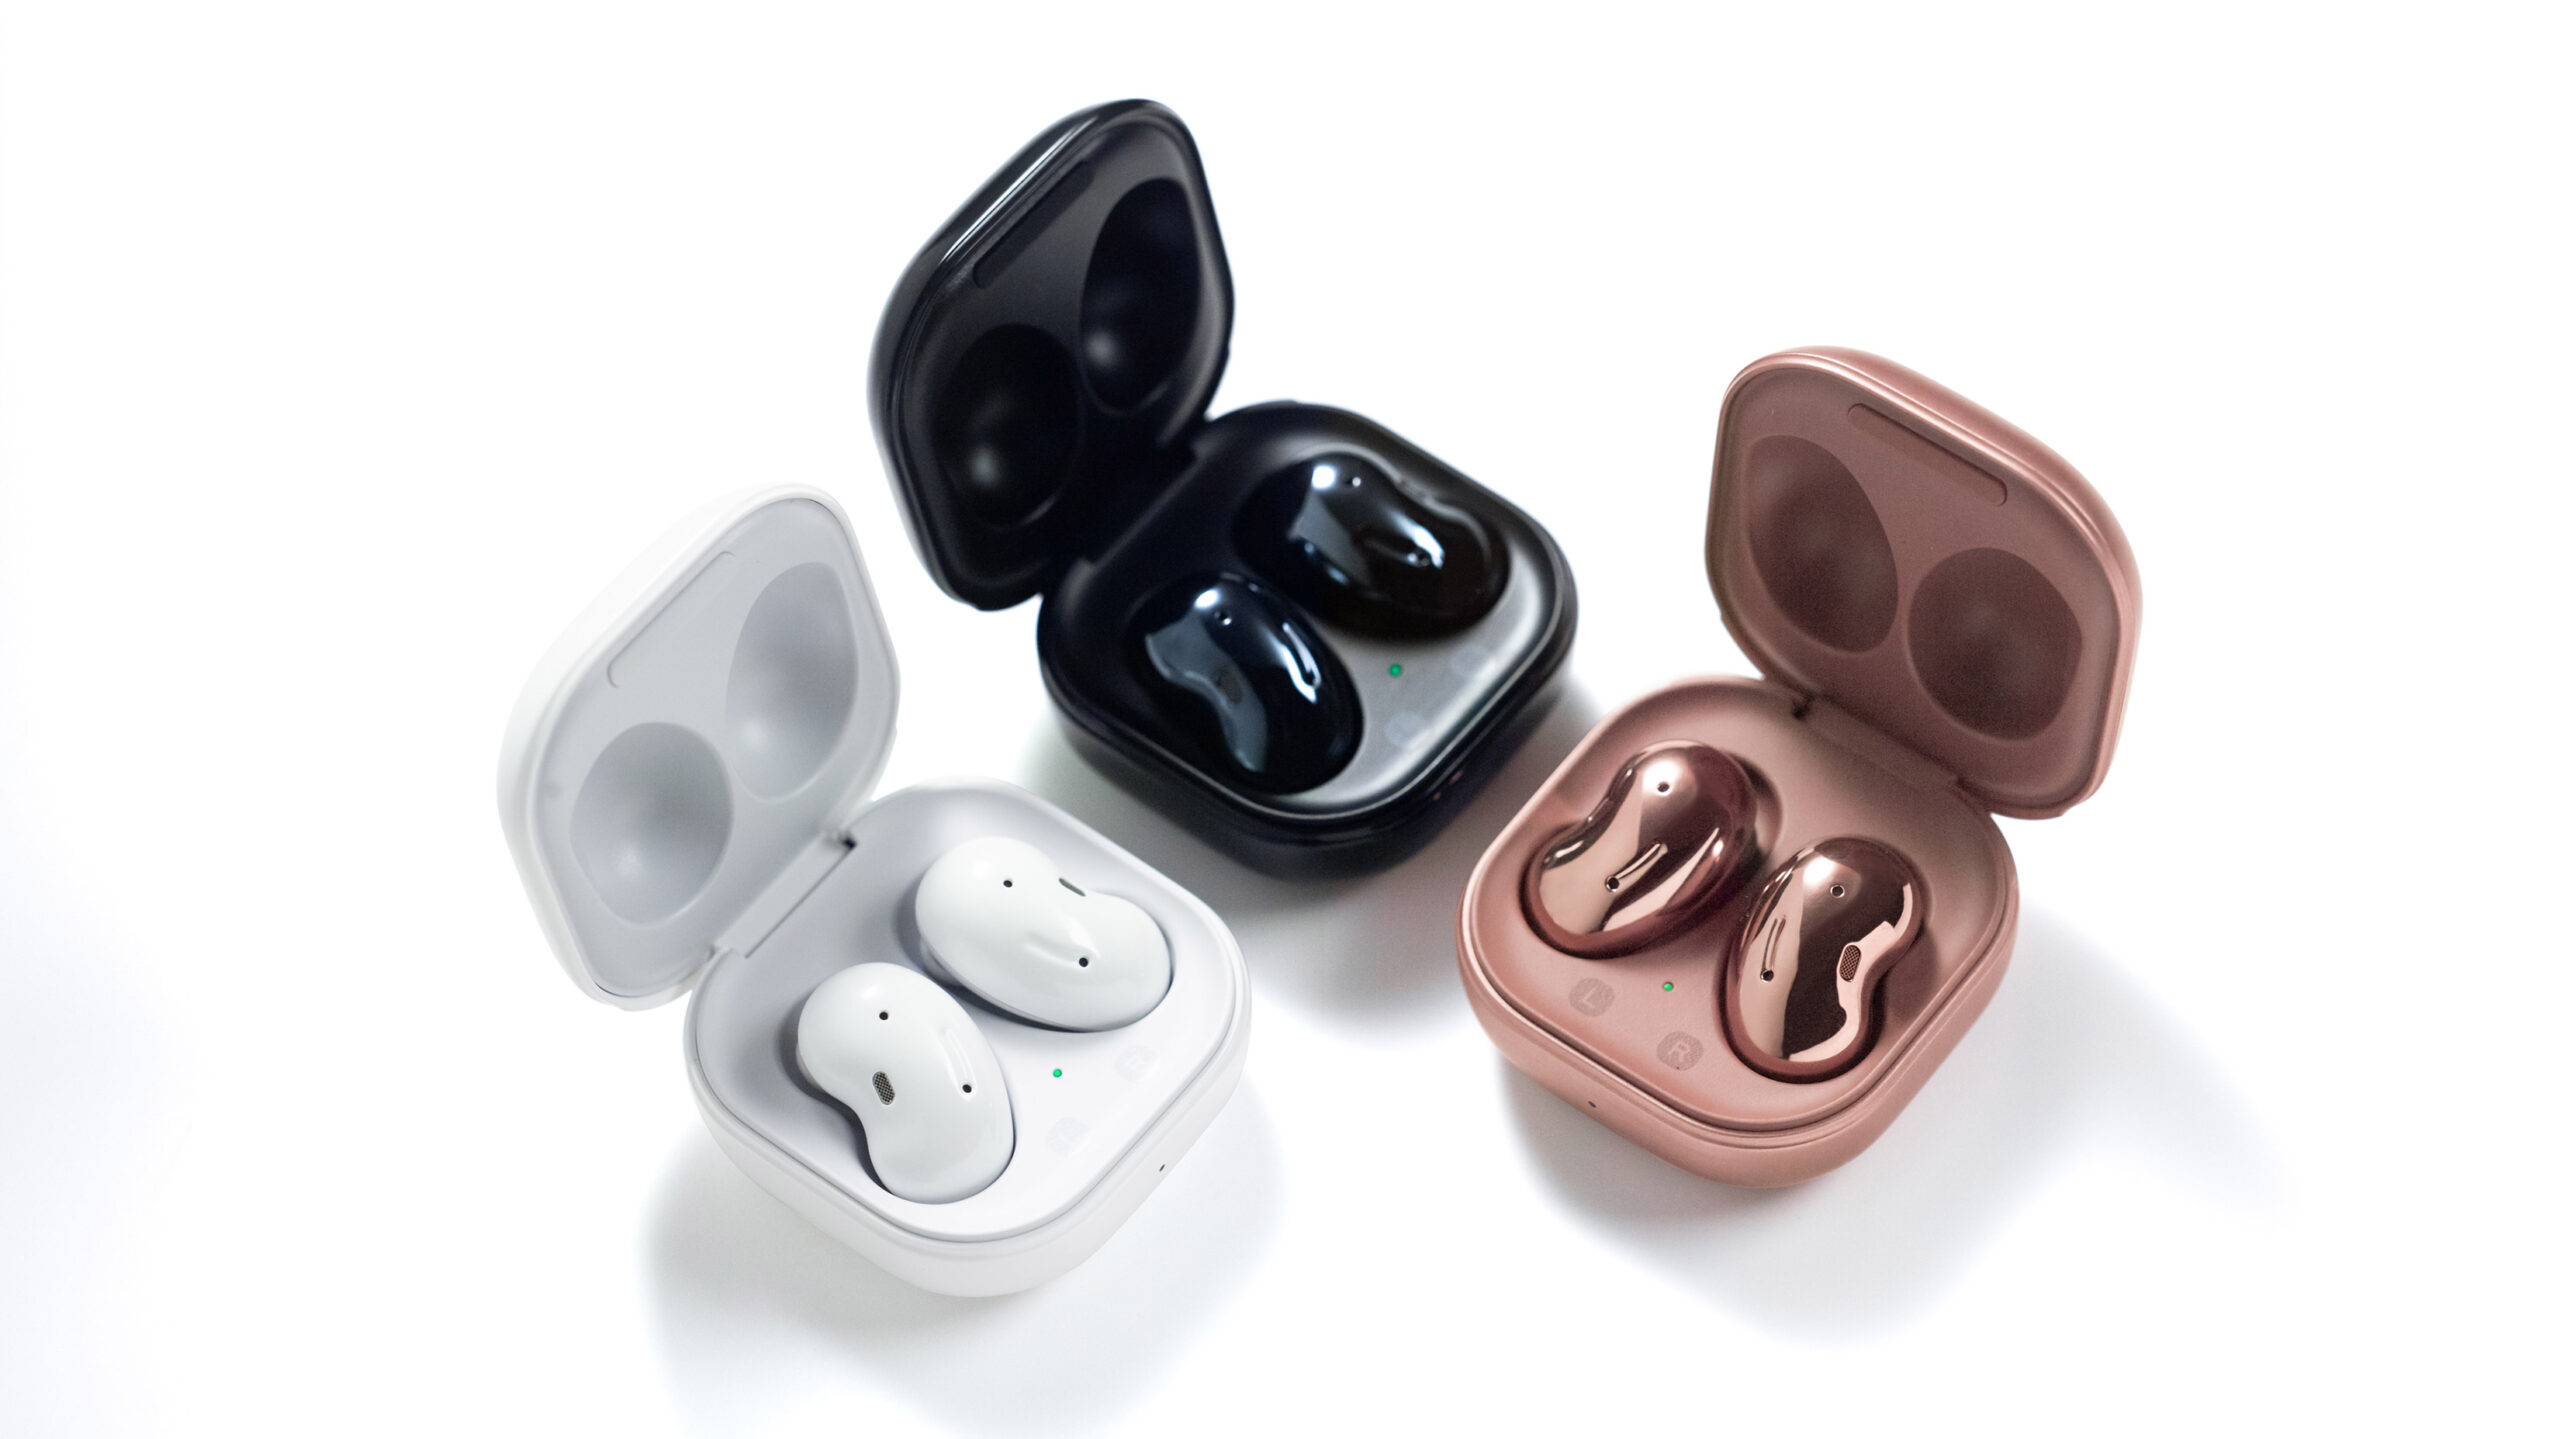 Samsung unveils new bean-shaped Galaxy Buds Live headphones with active noise cancellation- The Canadian